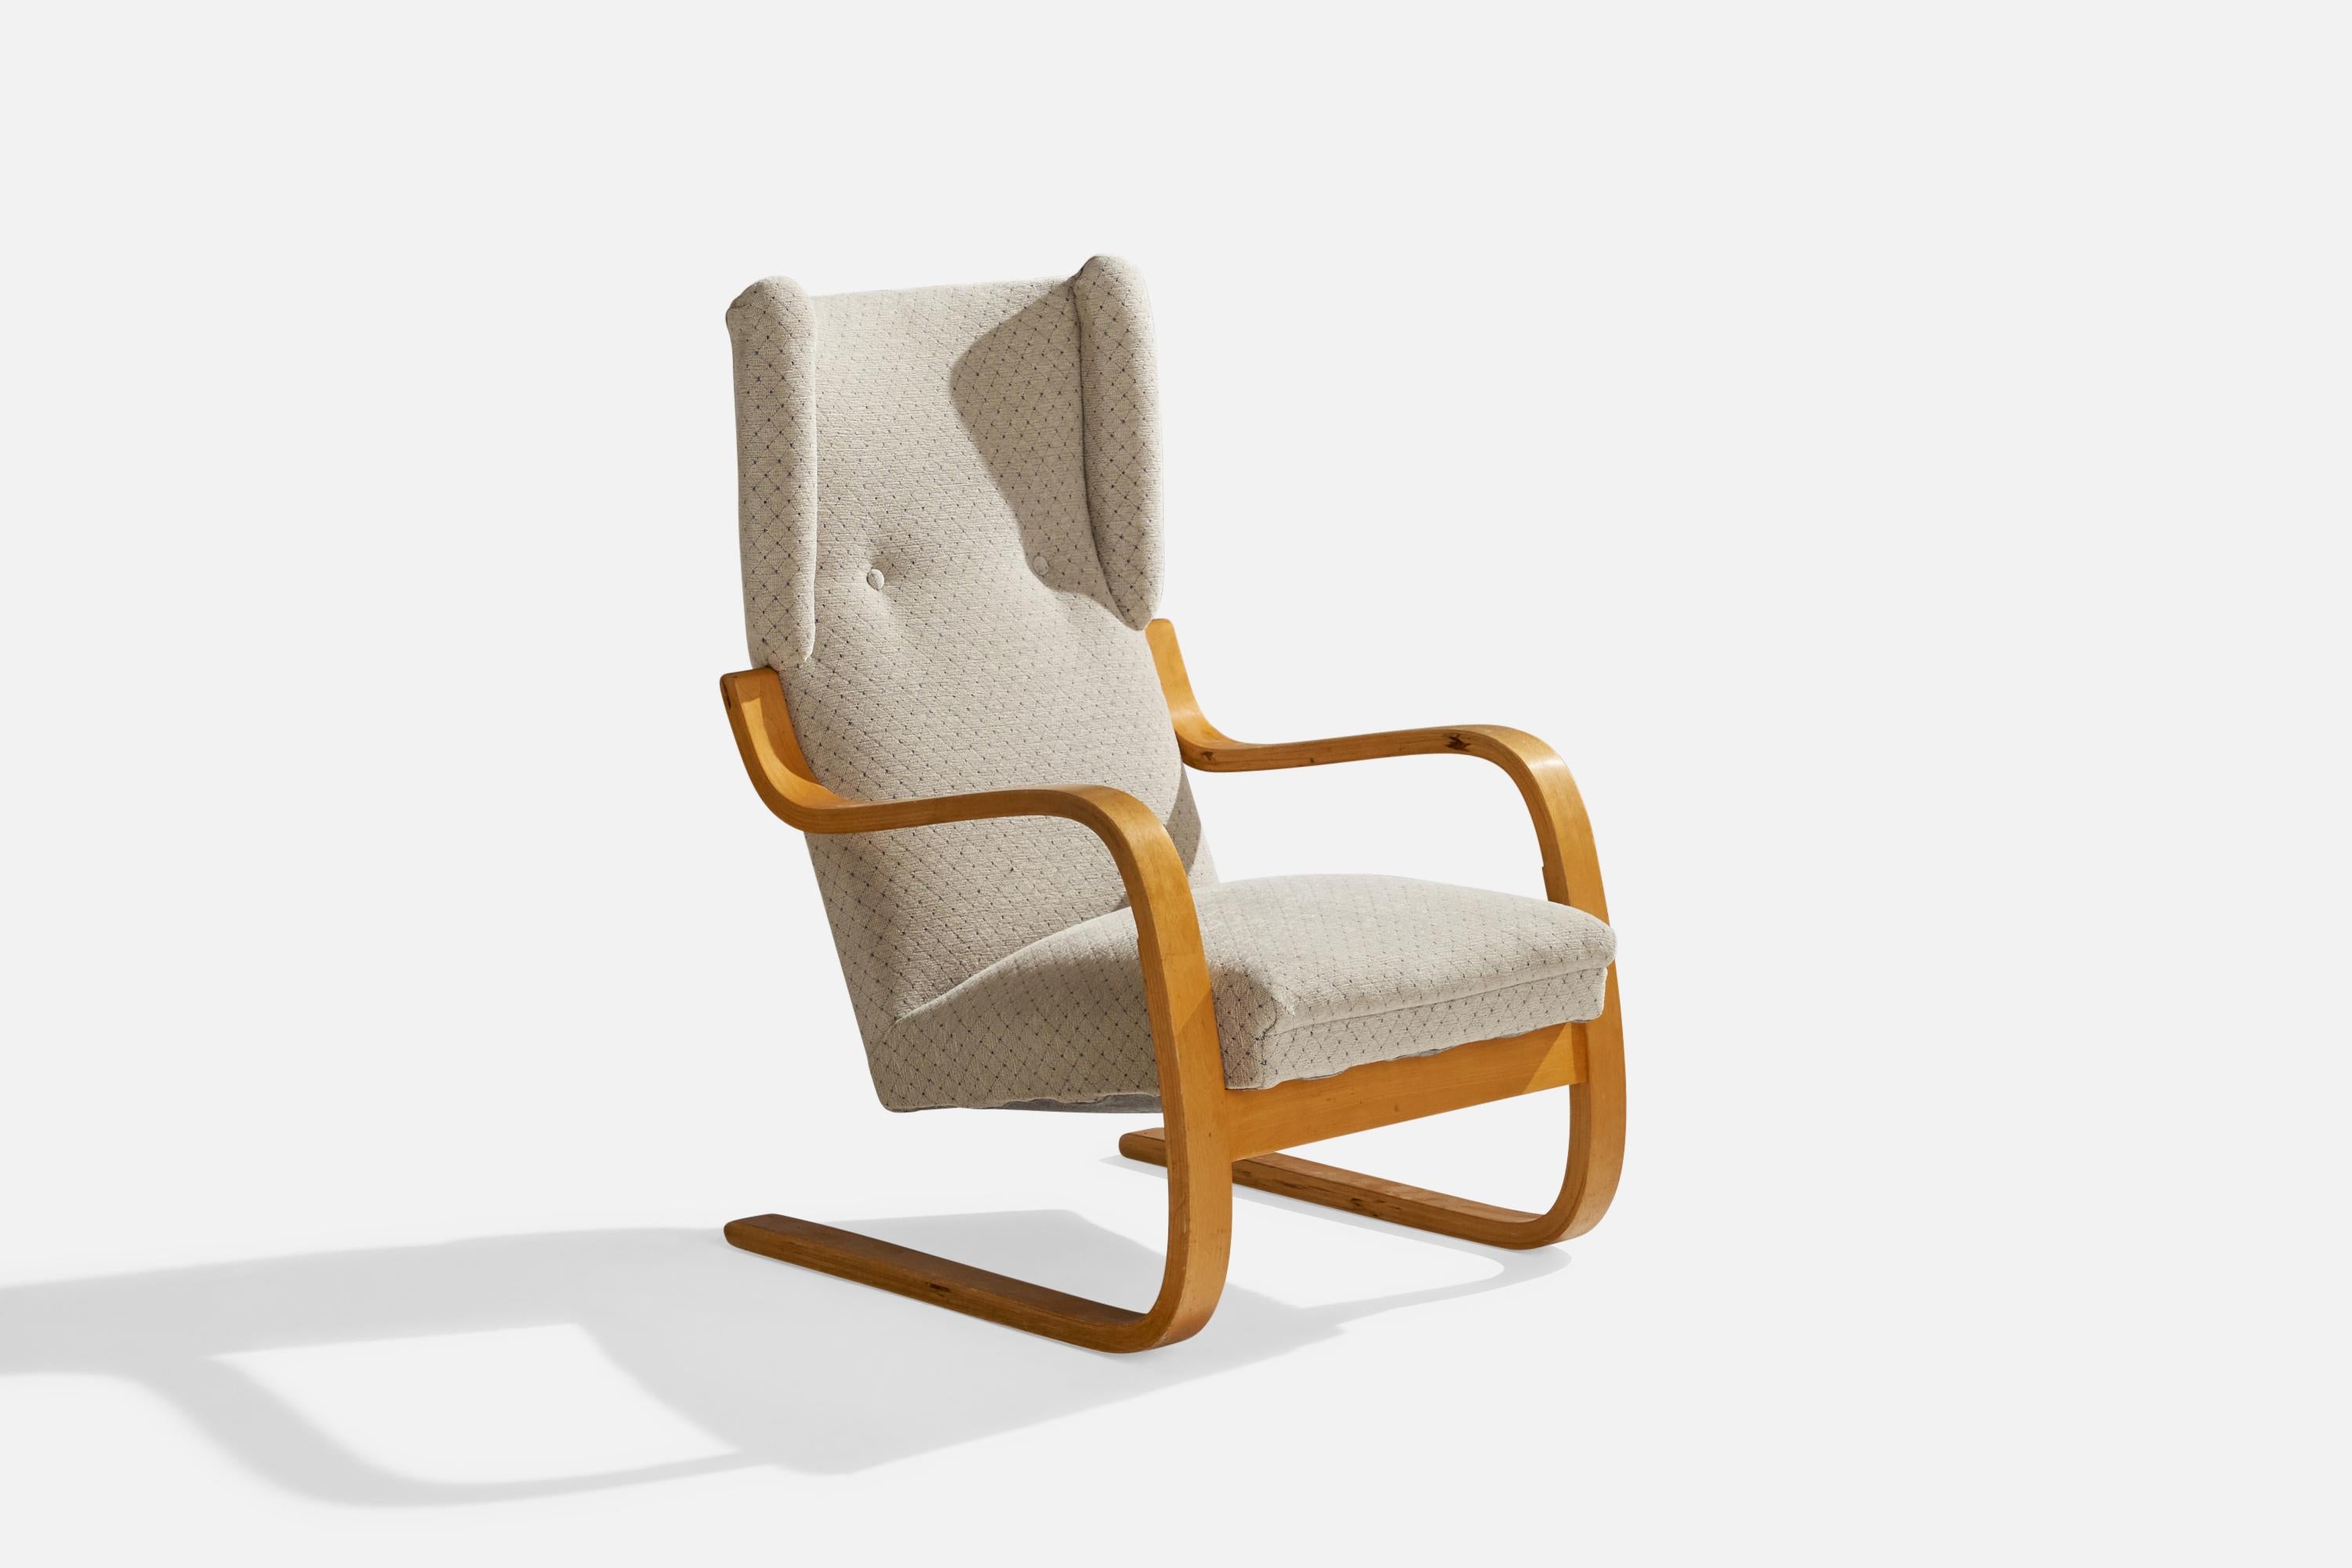 A moulded birch and light-grey fabric lounge chair desisgned by Alvar Aalto and produced by Artek, Finland, c. 1970s.

seat height 15”. 